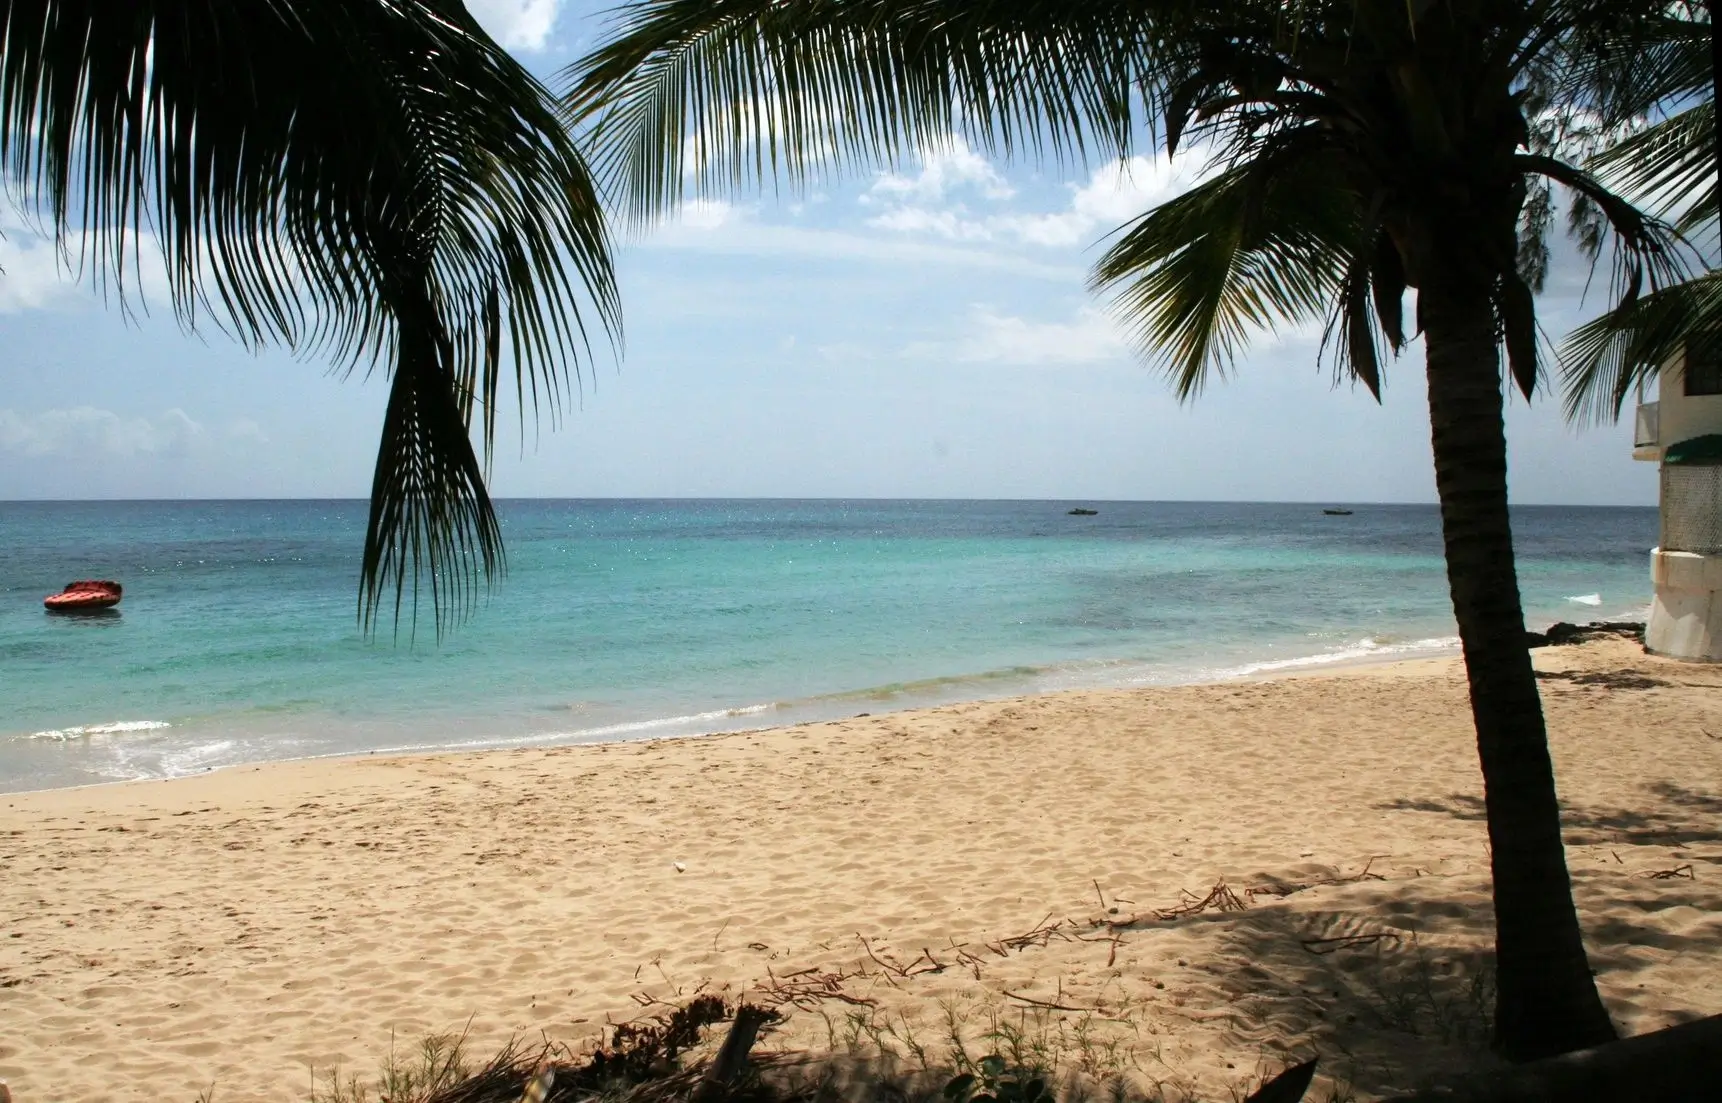 A beach with palm trees and the ocean in the background.